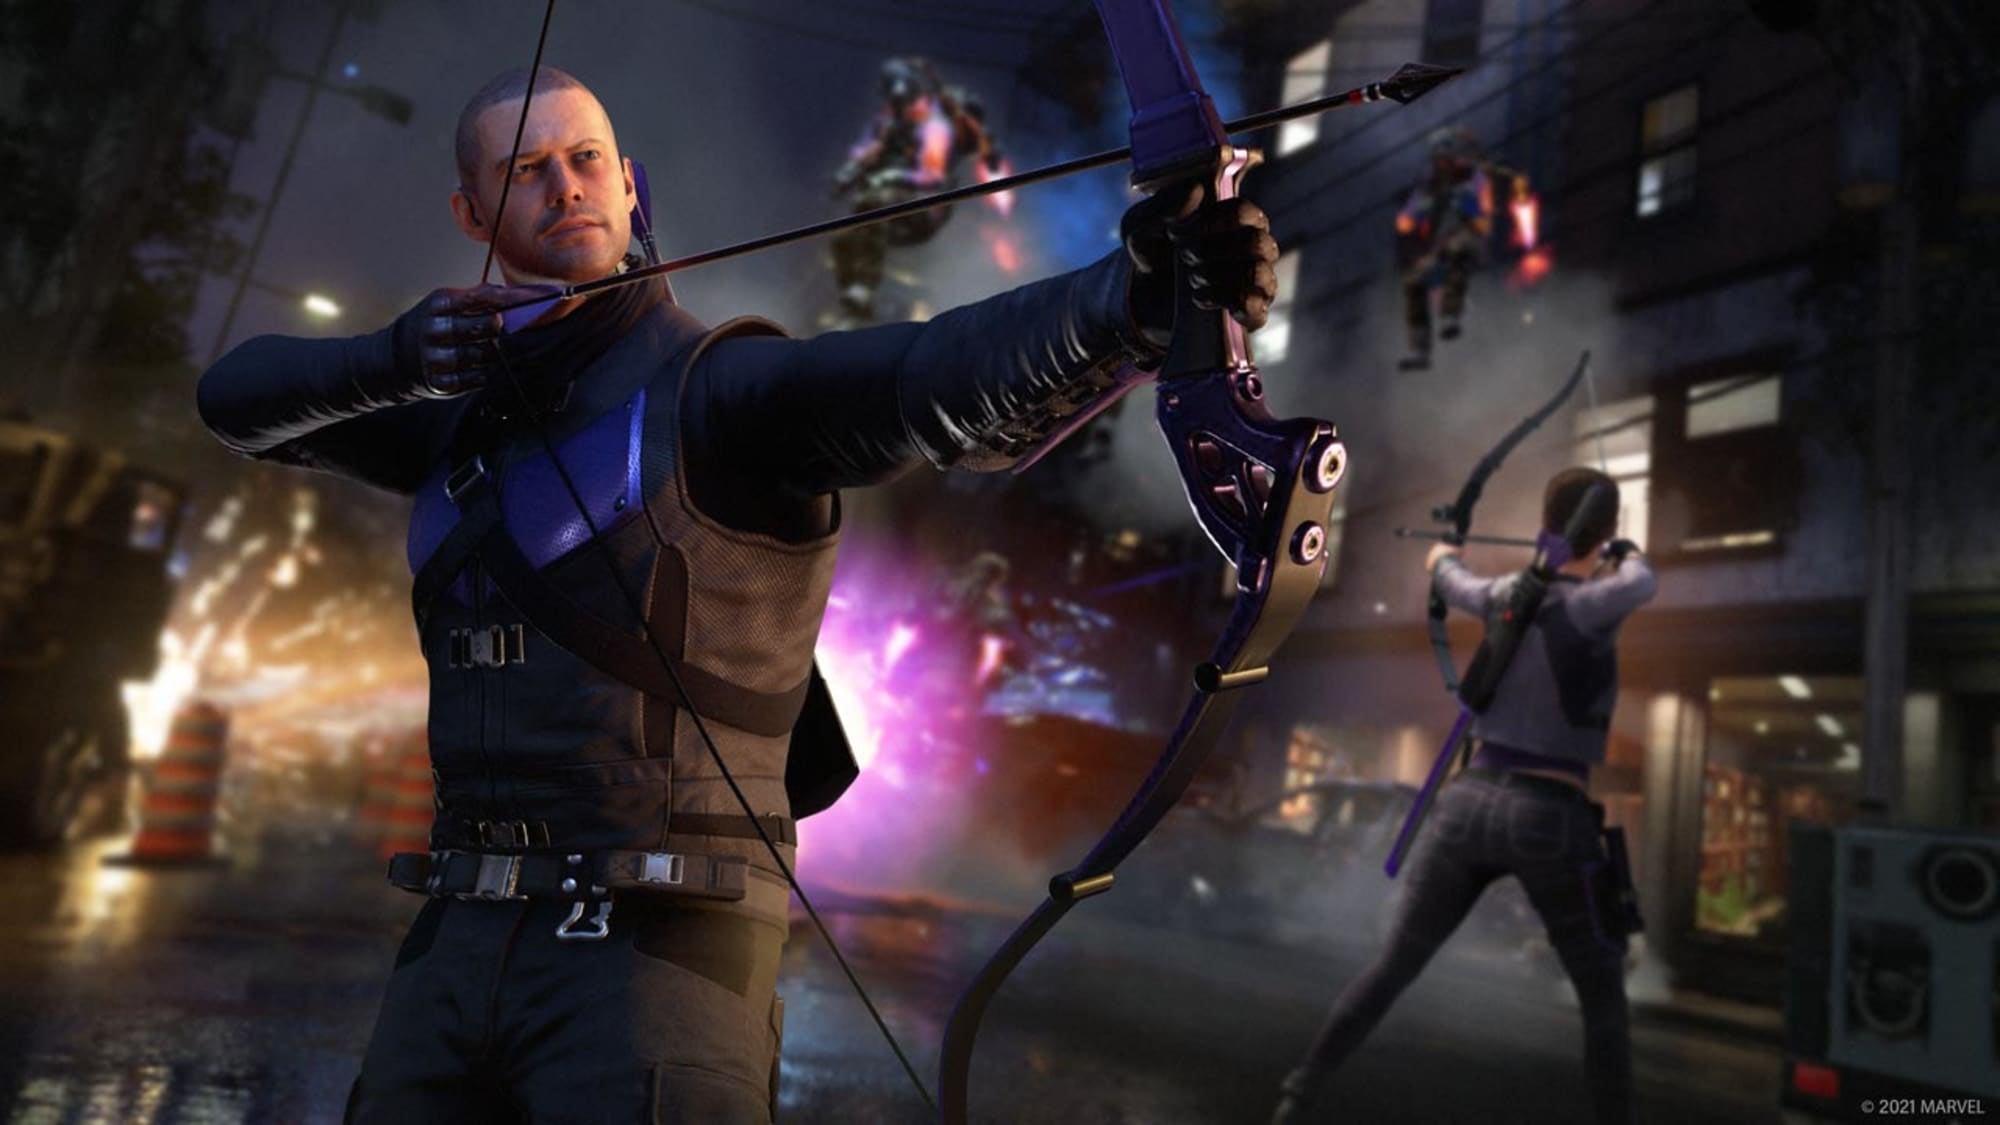 An image of Marvel's Avengers DLC Operation Hawkeye: Future Imperfect, showing Hawkeye (Clint Barton) in the foreground with an arrow loaded, and Kate Bishop in the background doing the same.